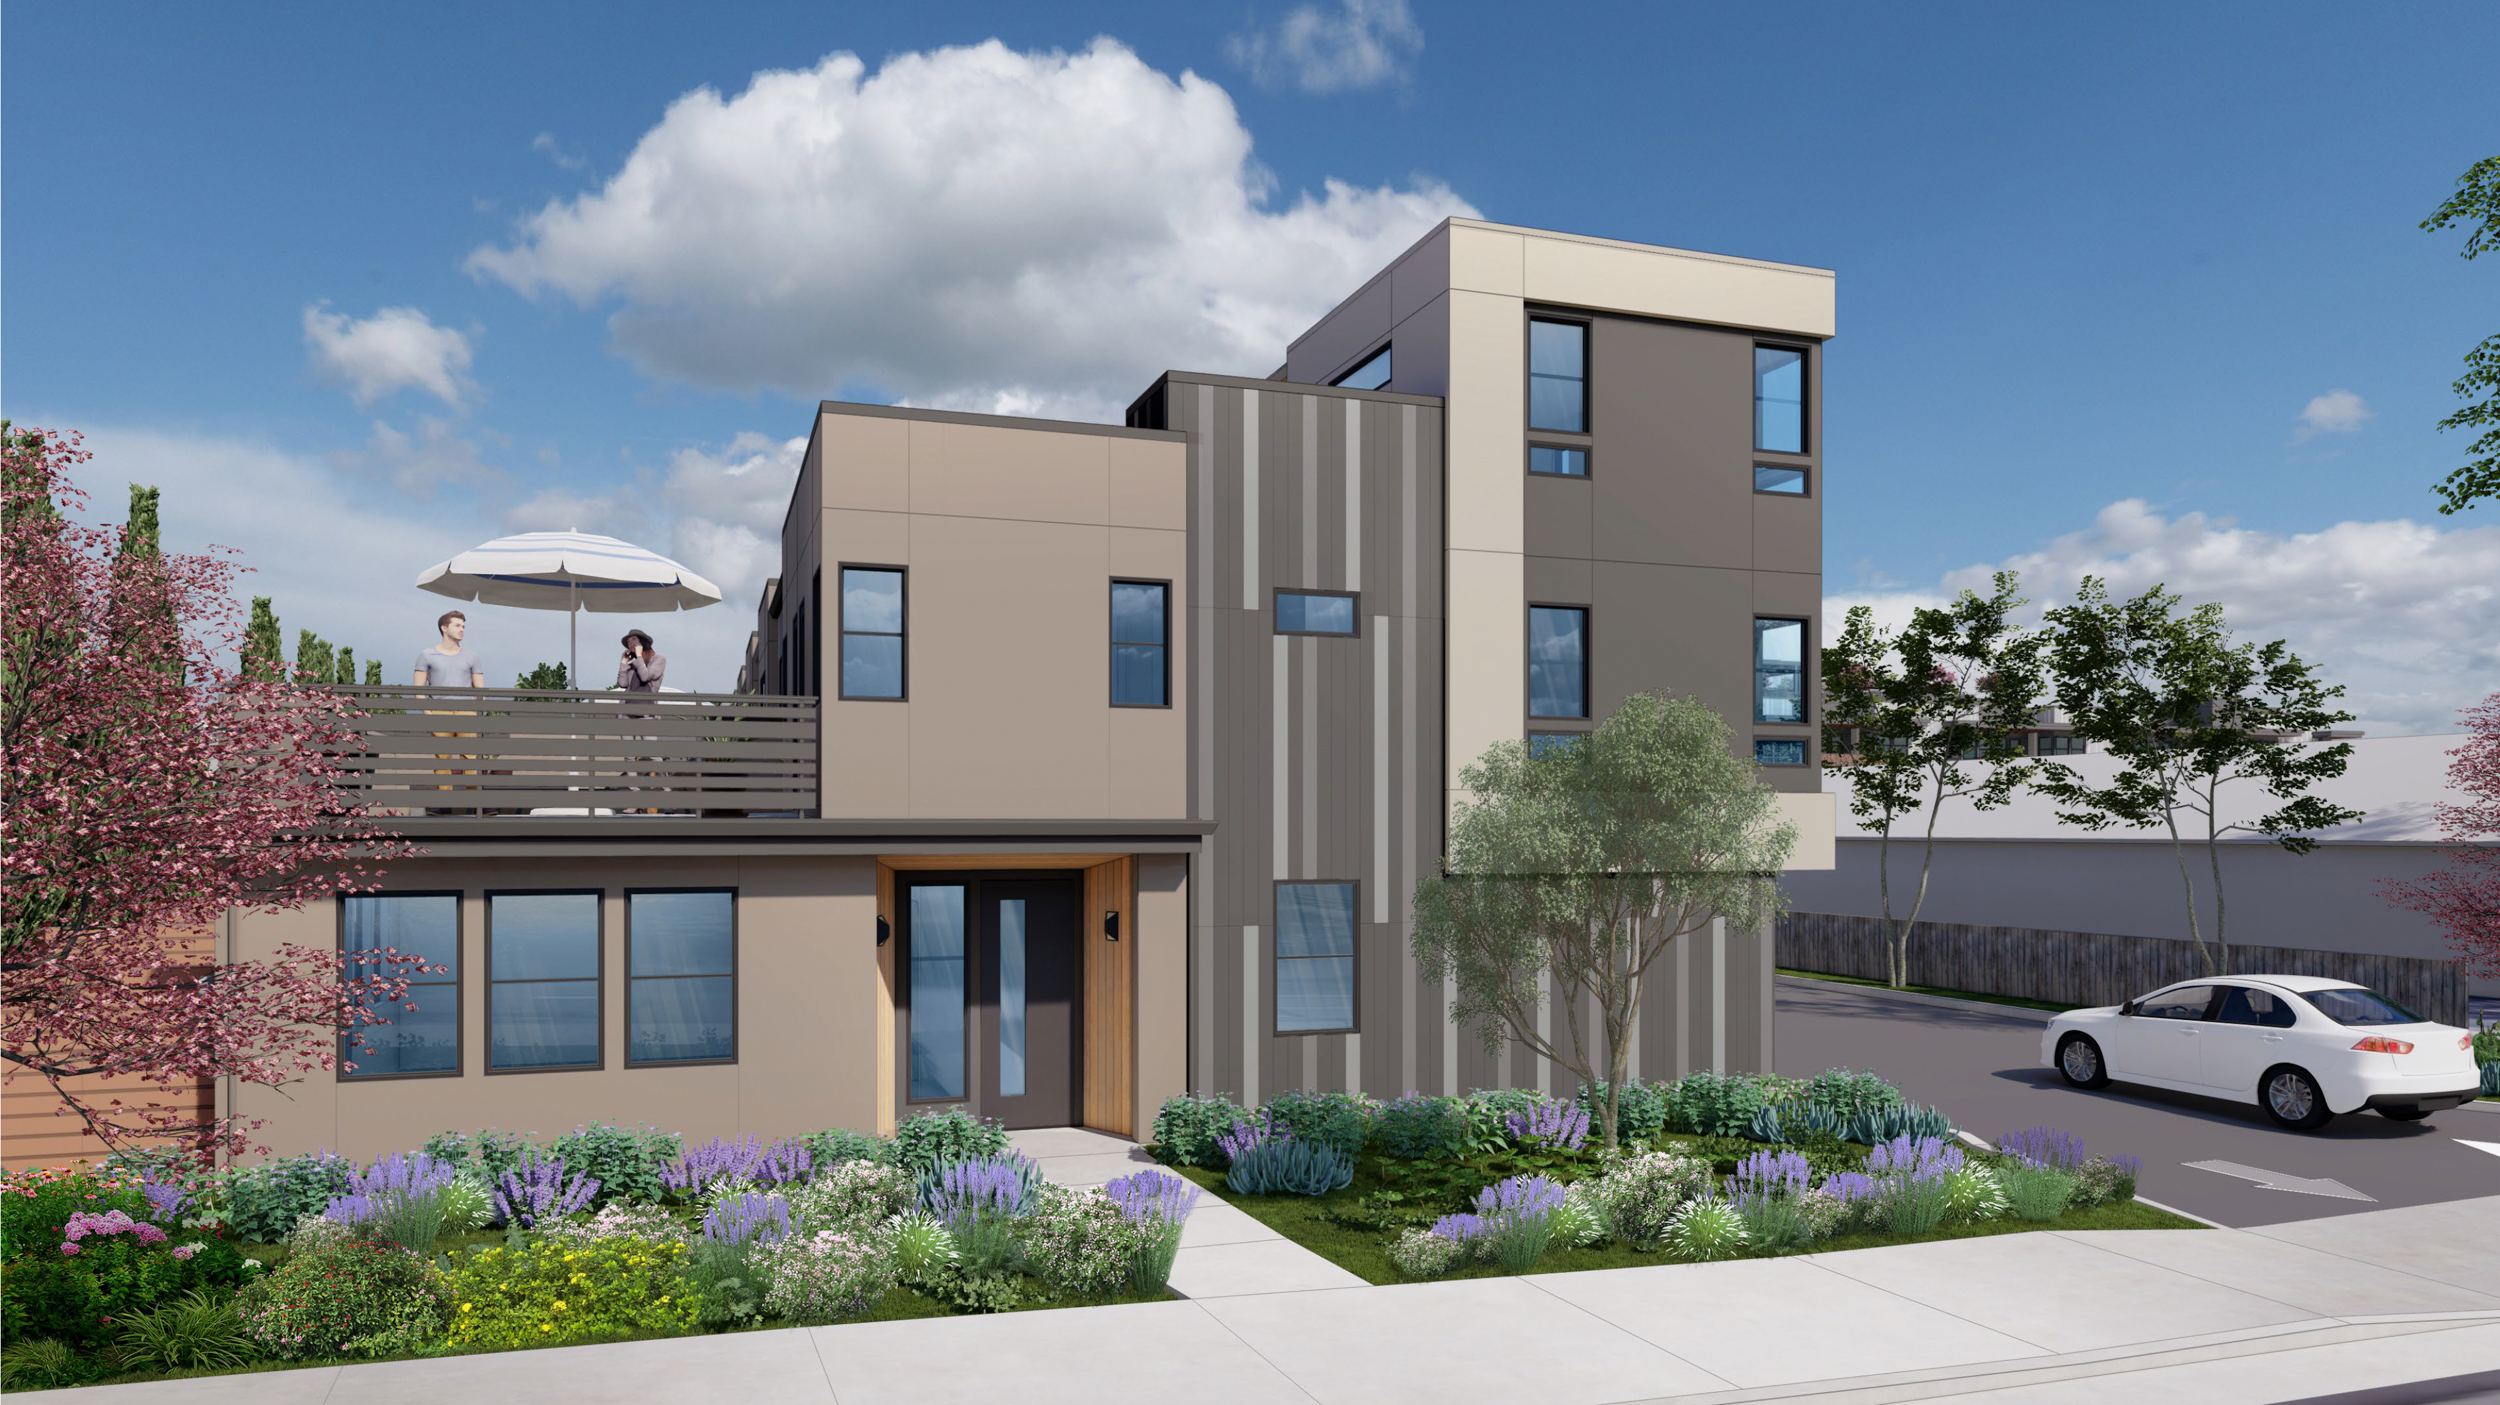 1655 South De Anza Boulevard townhomes sidewalk landscaping view, rendering by Dahlin Group